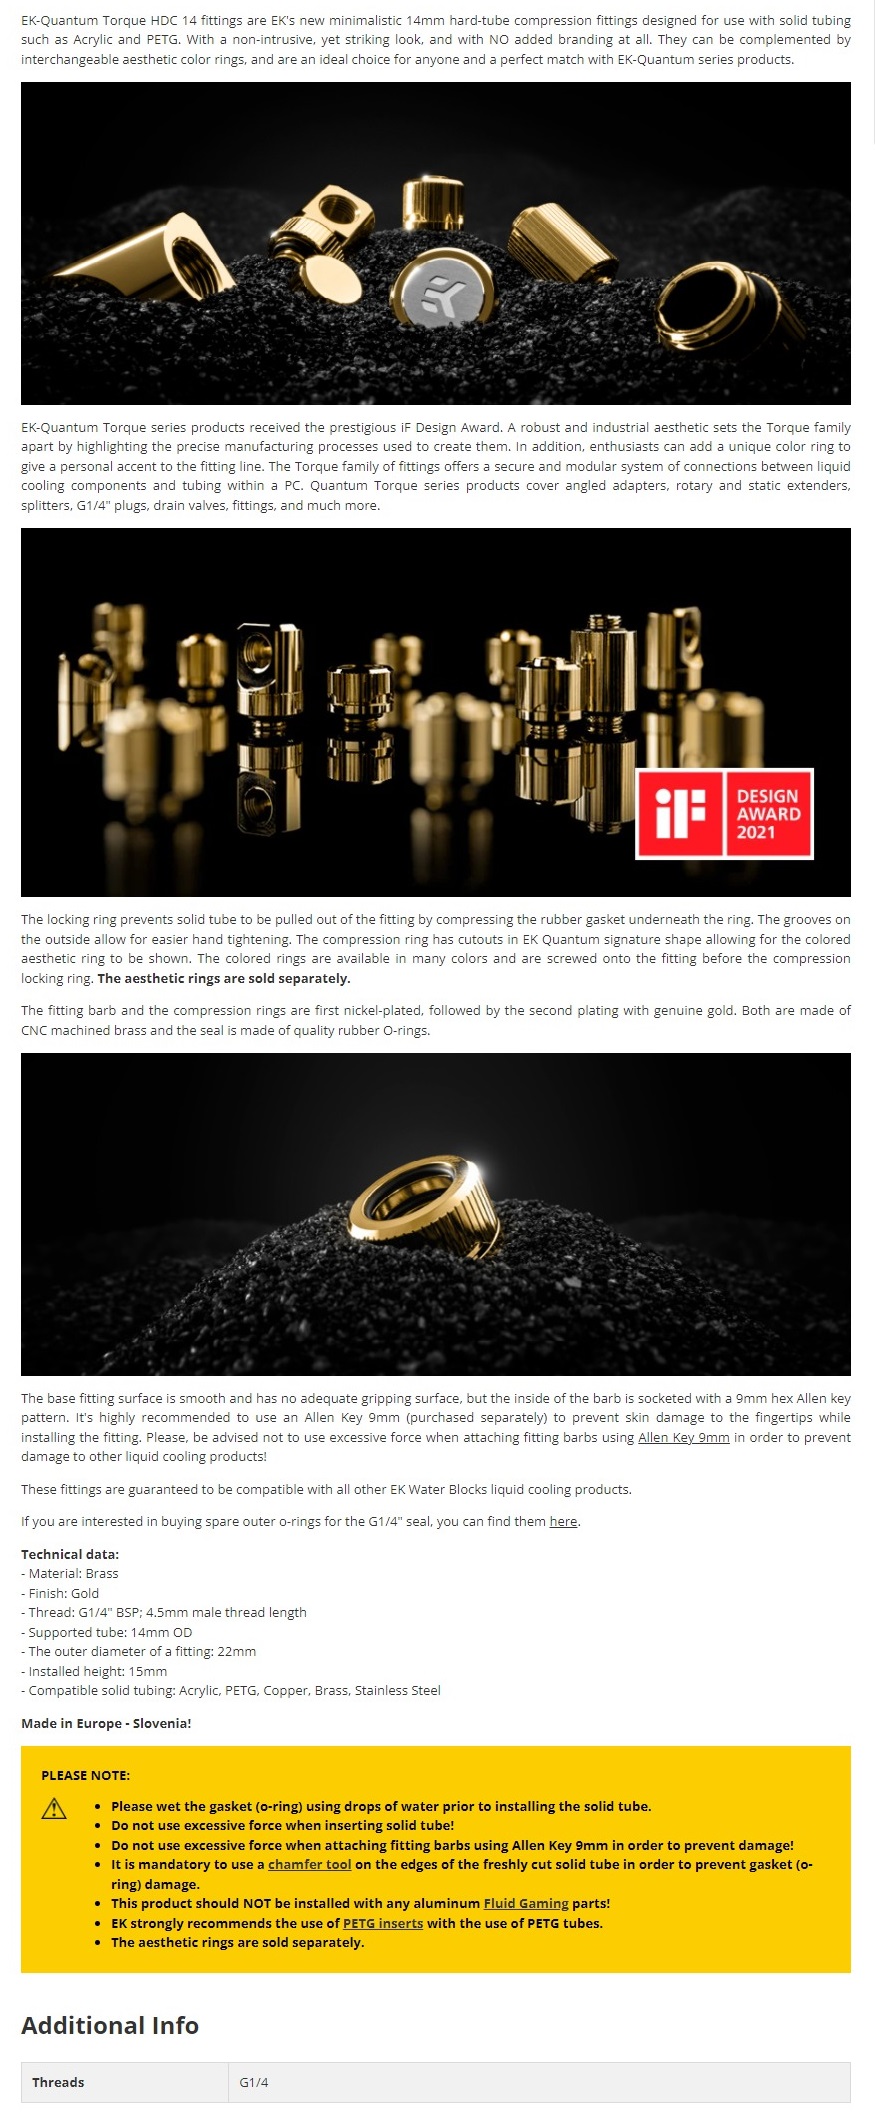 A large marketing image providing additional information about the product EK Quantum Torque HDC 14 - Gold - Additional alt info not provided